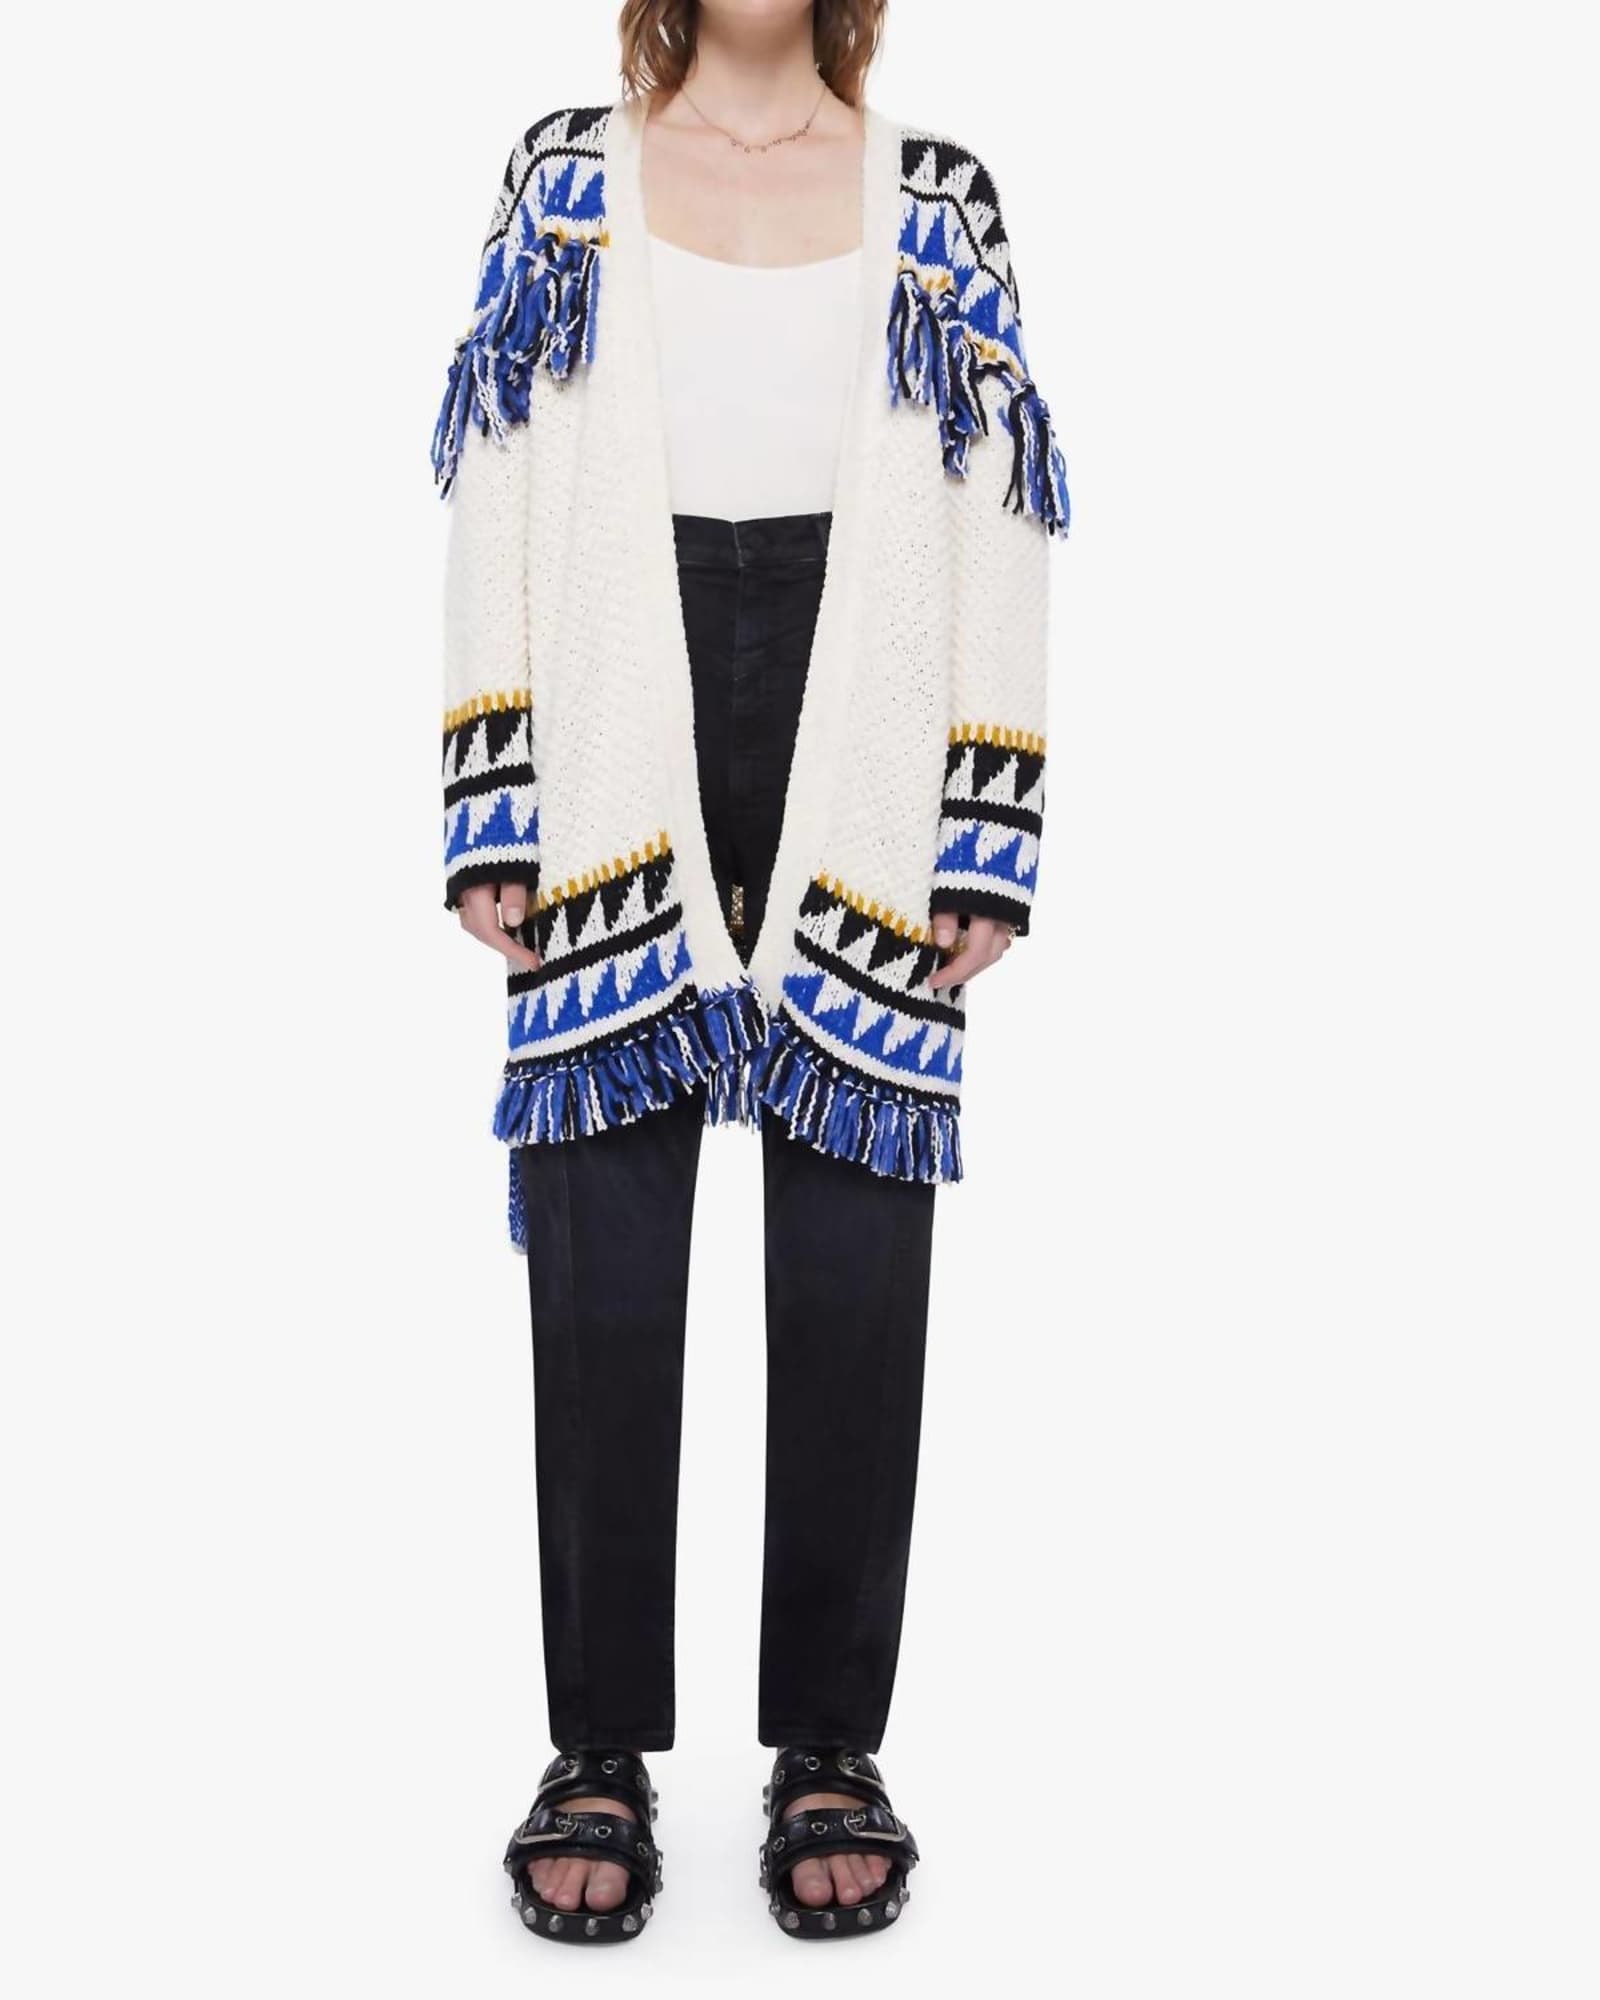 Fringe Cardigan in The Tassel Is Worth The Hassel | The Tassel Is Worth The Hassel